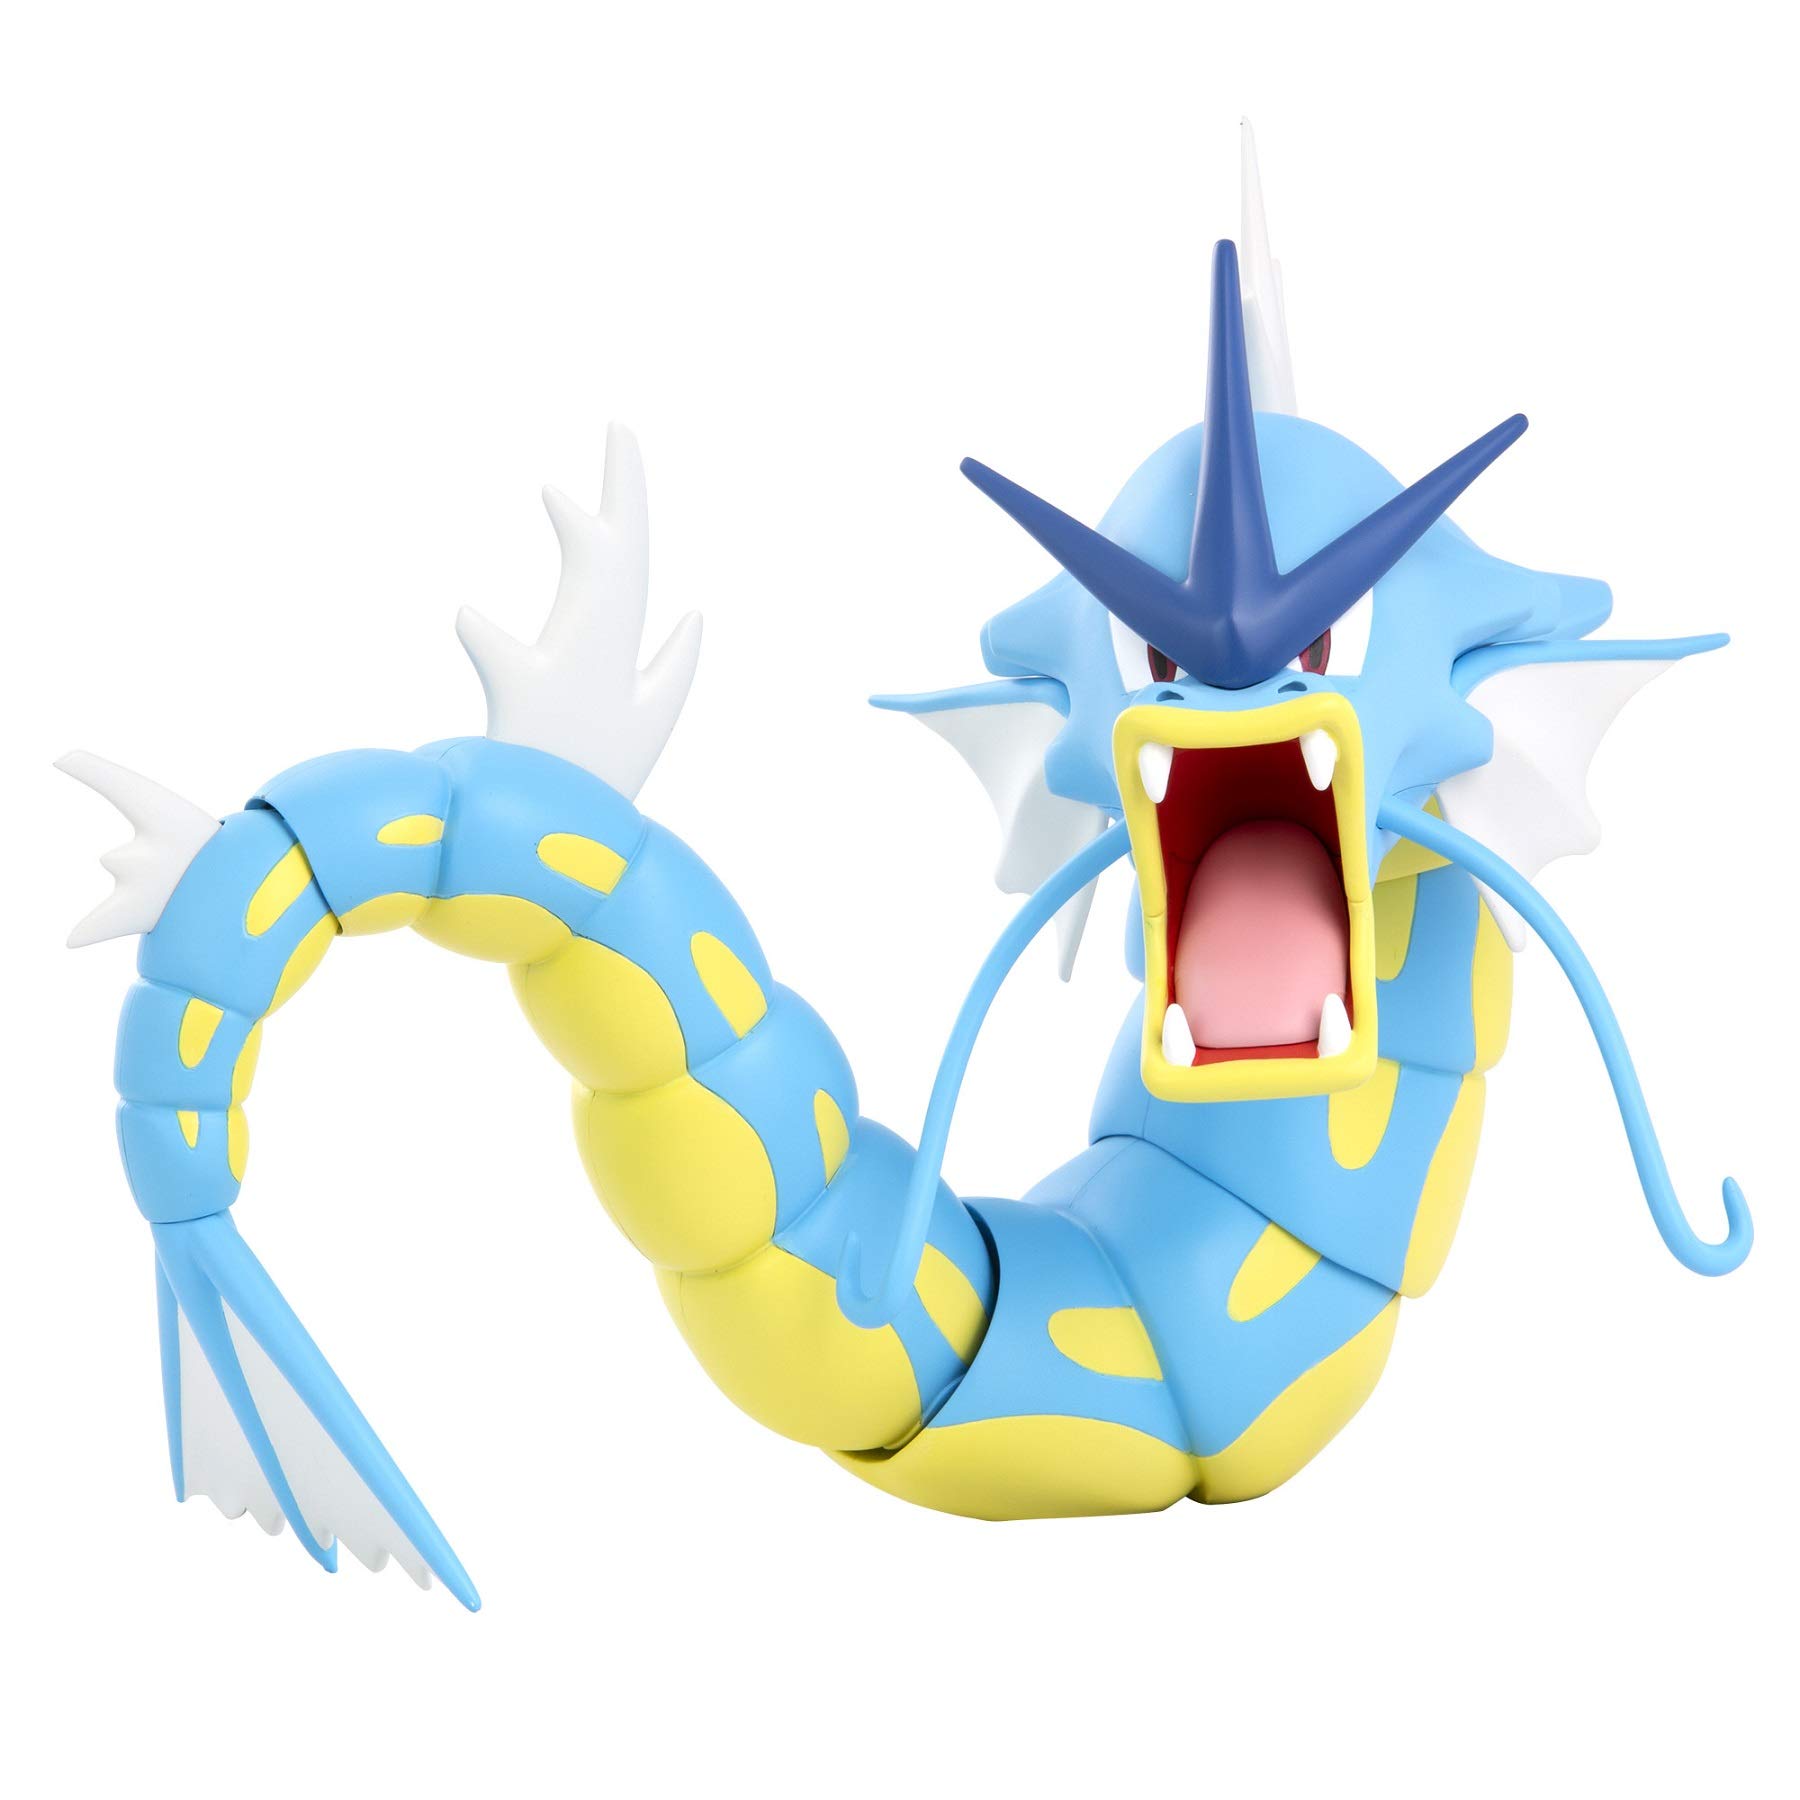 Pokemon Gyarados 12-Inch Epic Battle Figure - Authentic Details, Fully Articulated Figure - Toys Inspired by Smash-Hit Animated Series - Gotta Catch ‘Em All